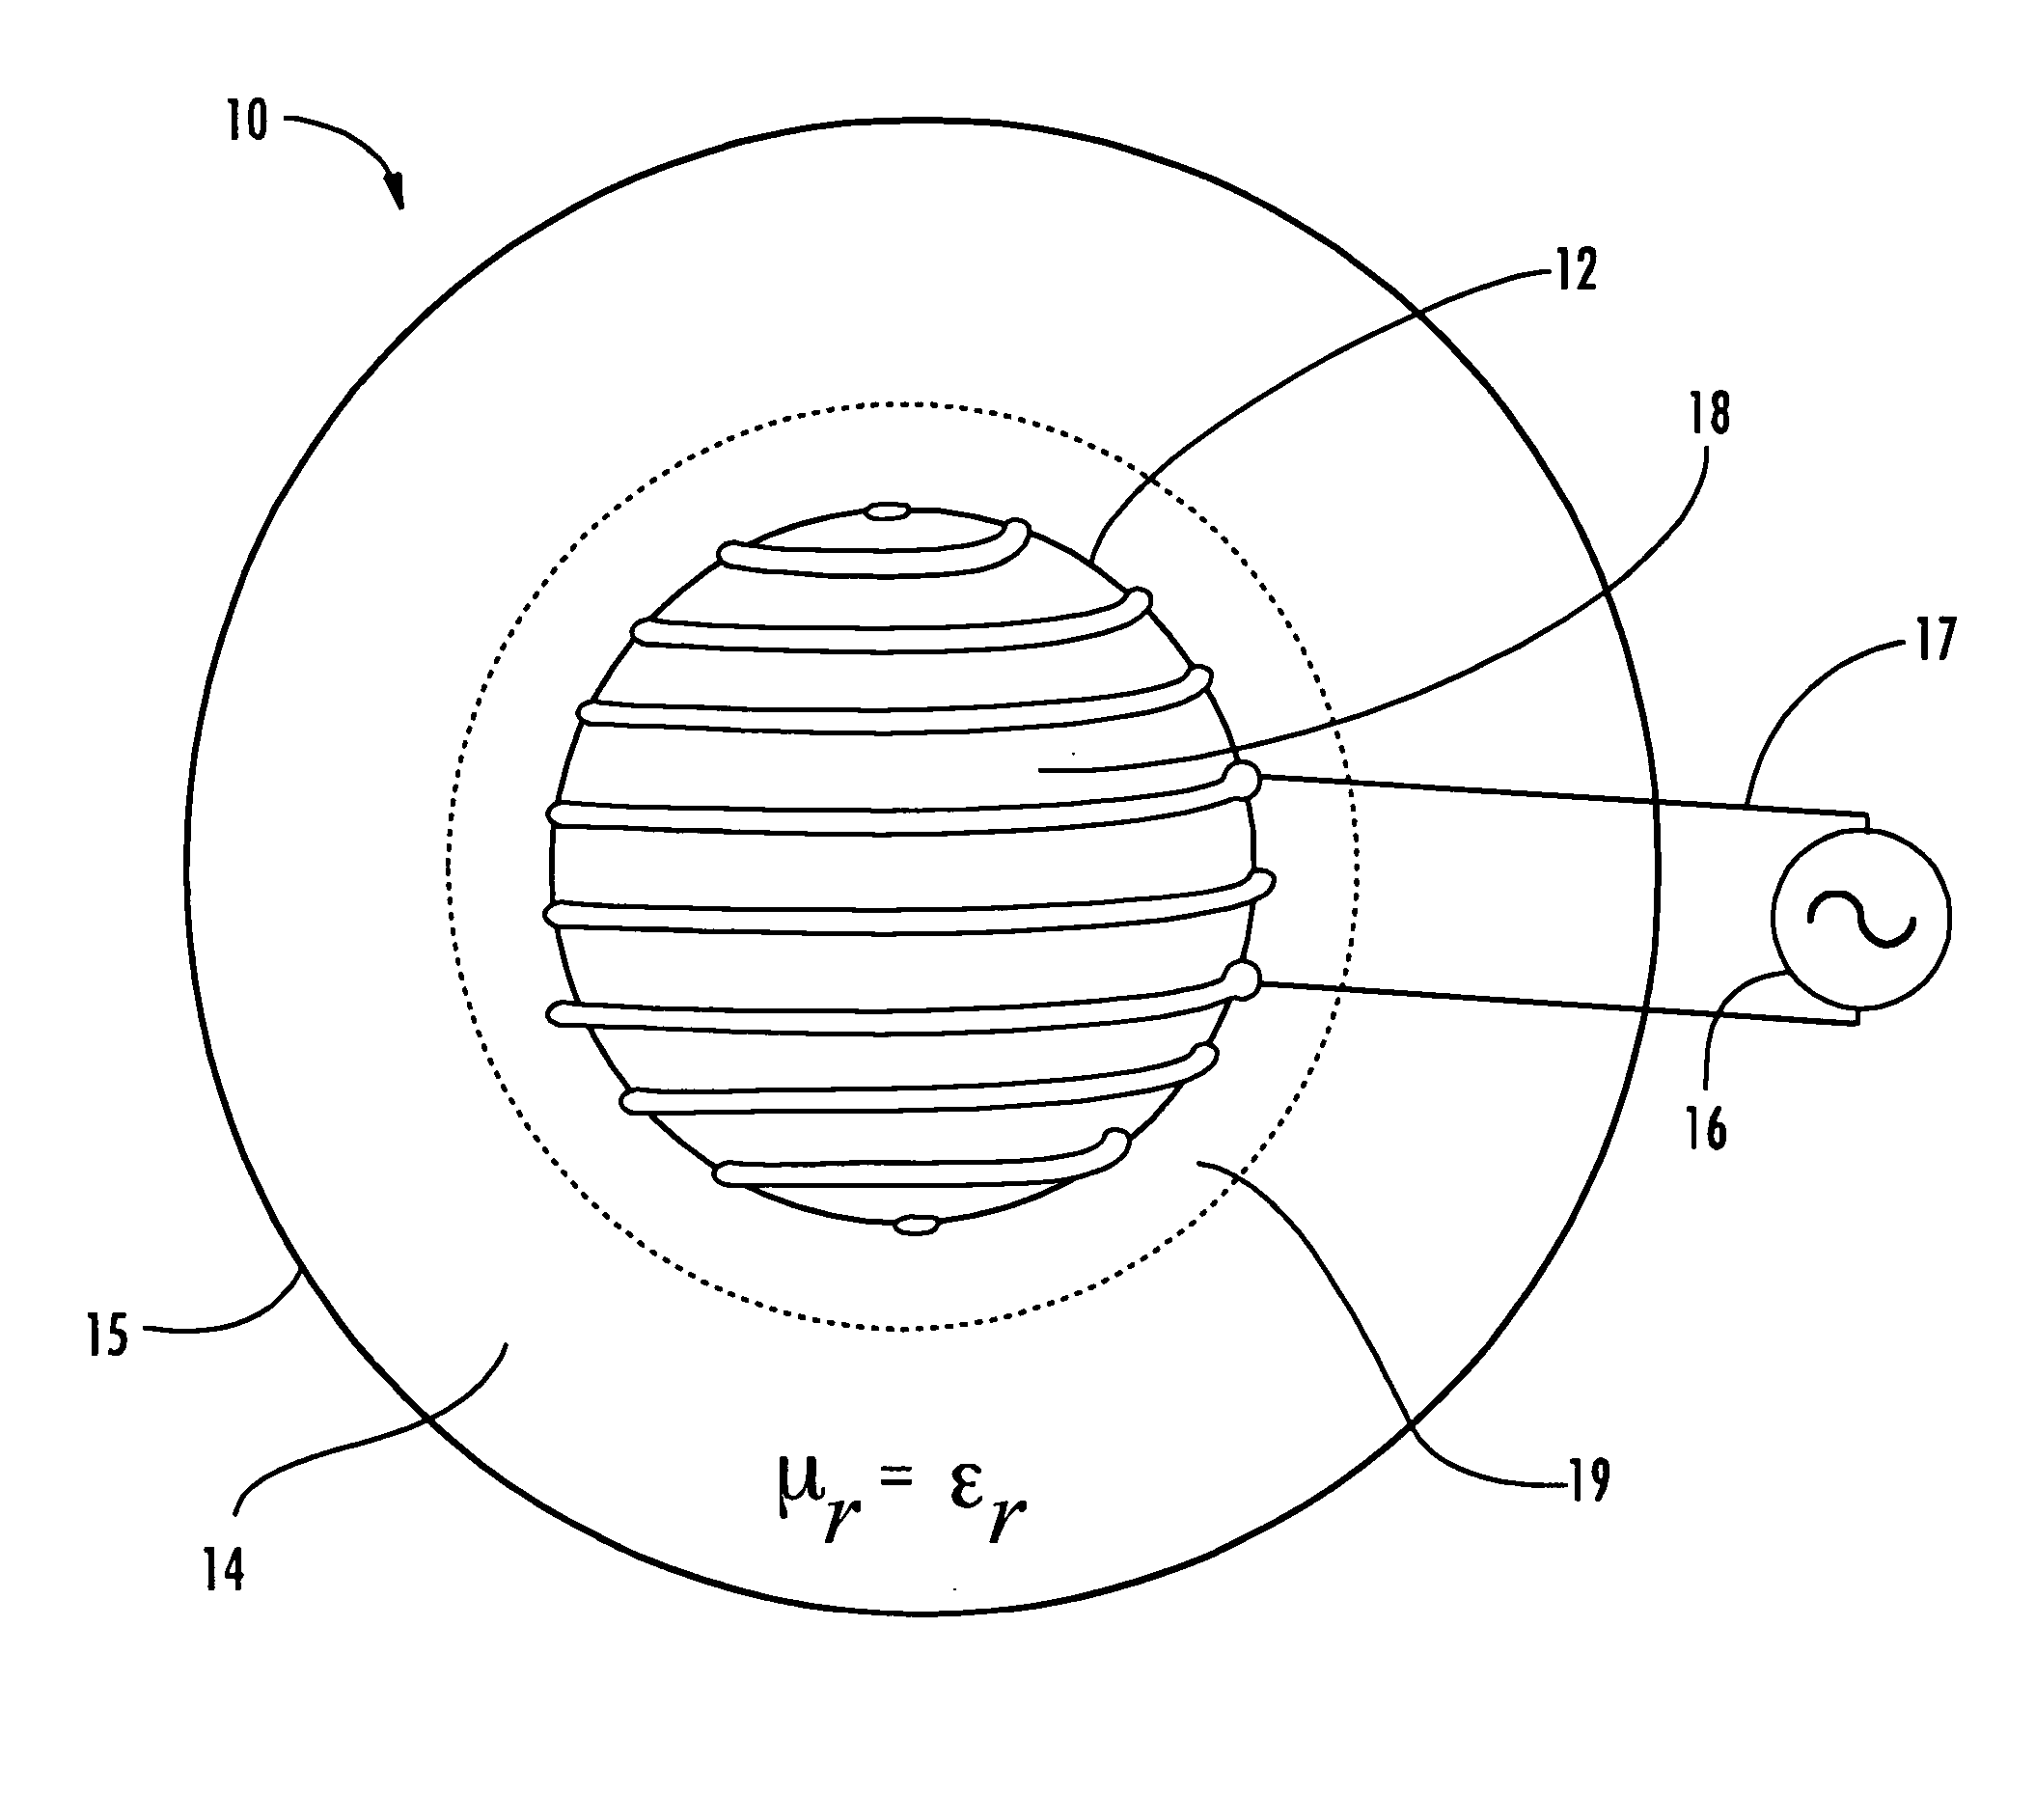 Broadband polarized antenna including magnetodielectric material, isoimpedance loading, and associated methods